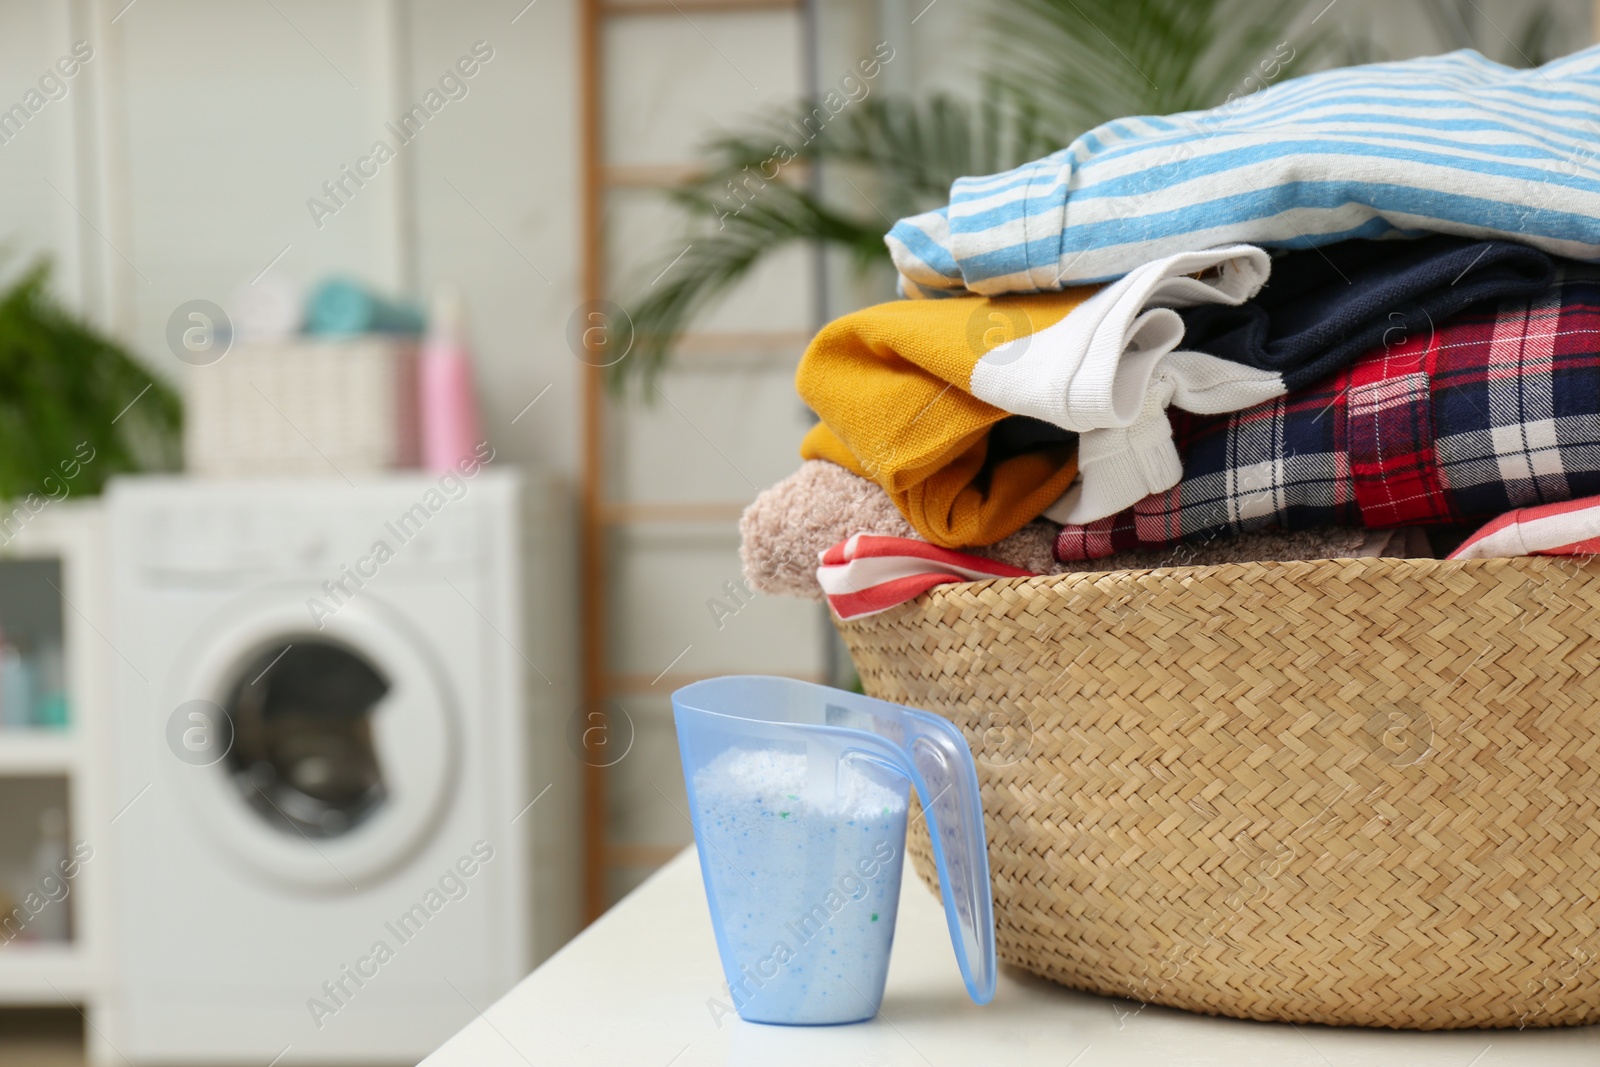 Photo of Wicker basket with laundry and detergent on countertop in bathroom. Space for text